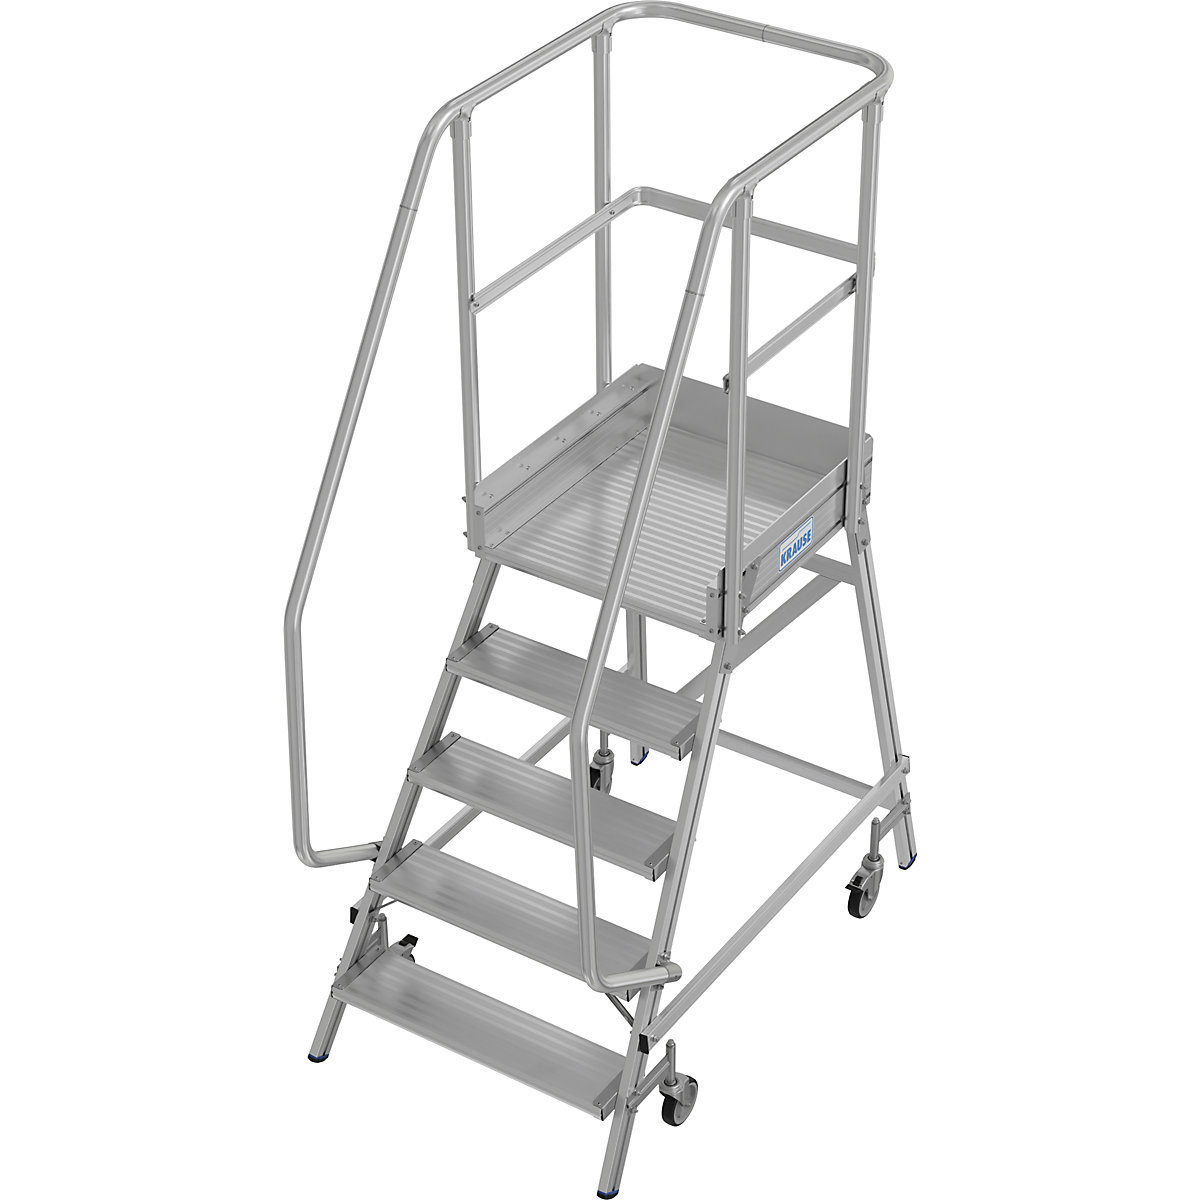 Mobile safety steps – KRAUSE, single sided access, foot rail, 5 steps-11